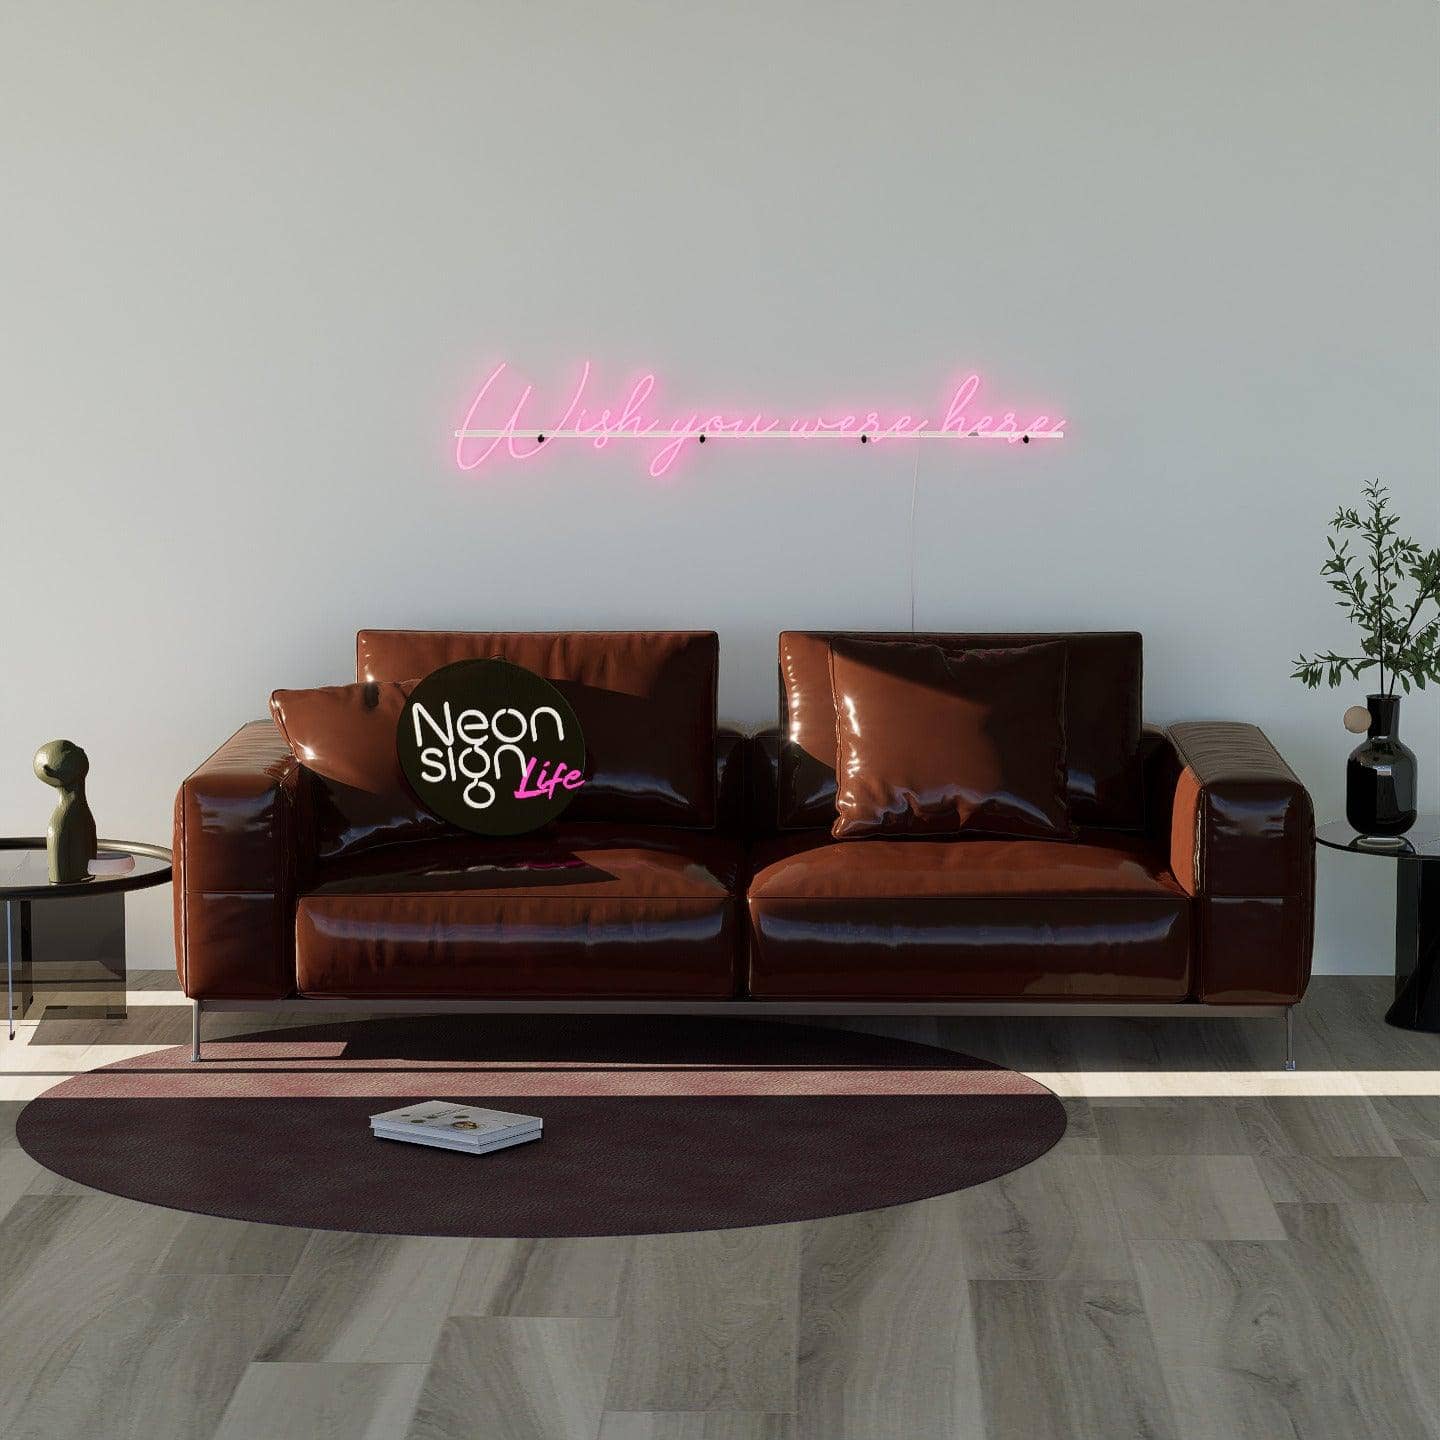 shot-of-lighted-pink-neon-lights-hanging-on-the-wall-during-the-day-wish-you-were-here